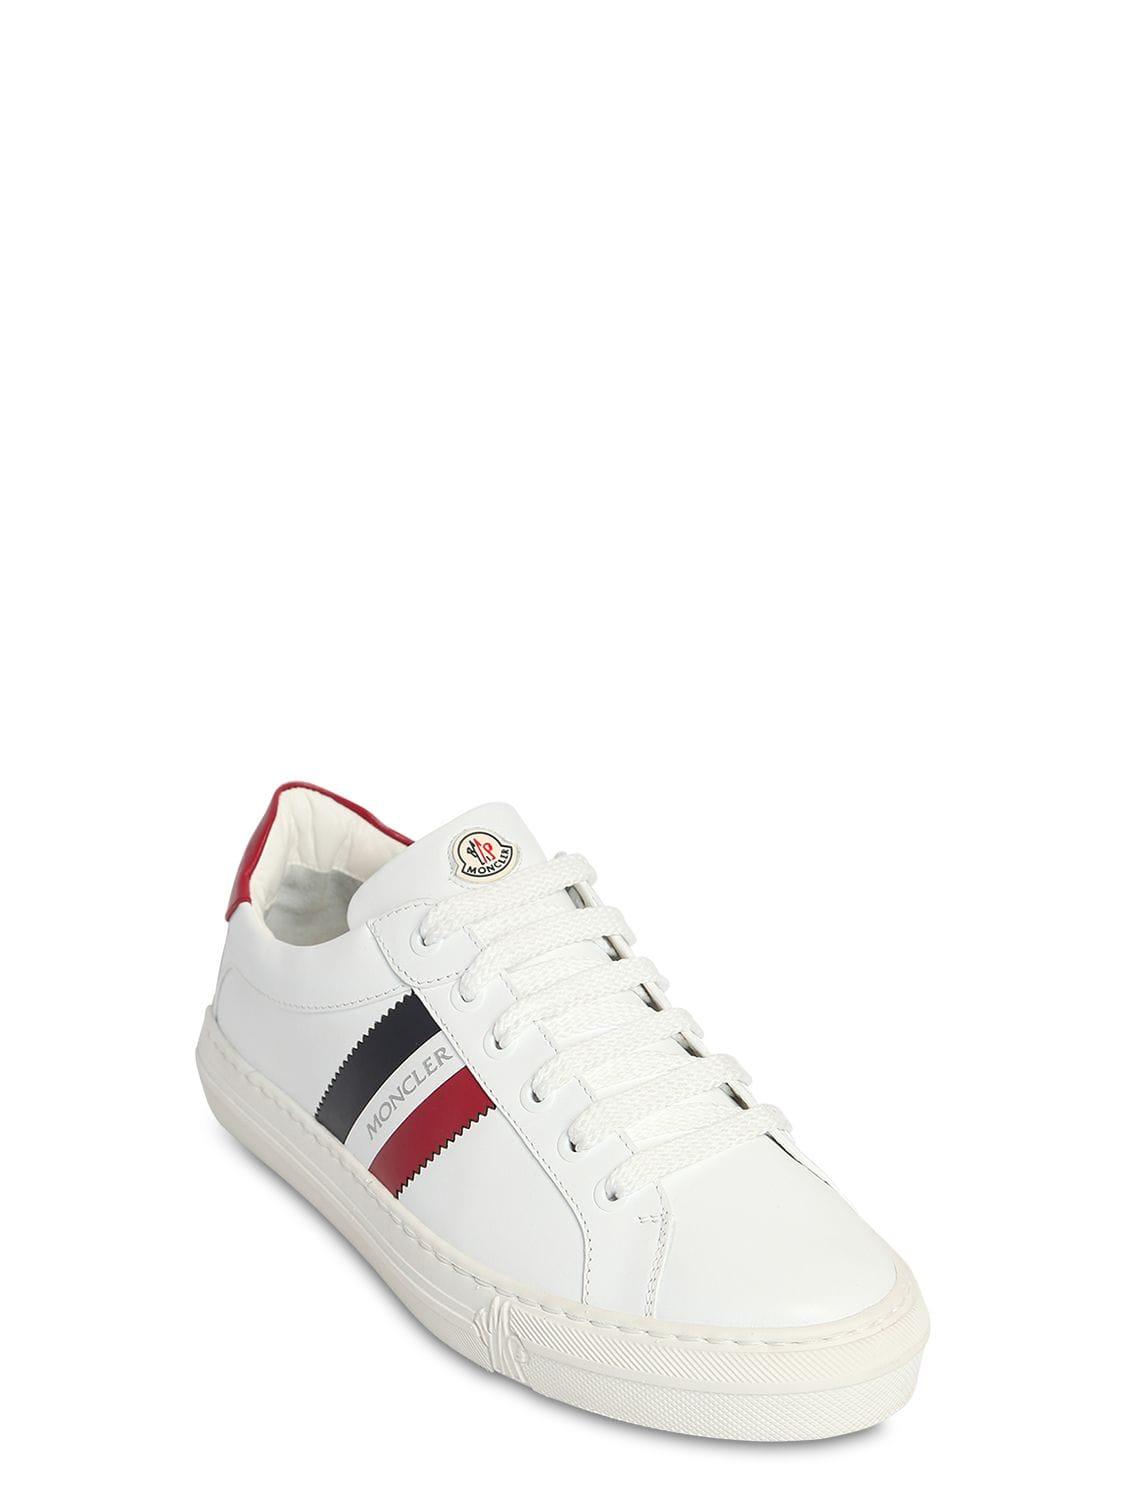 Moncler Ariel Leather Sneakers in White - Lyst